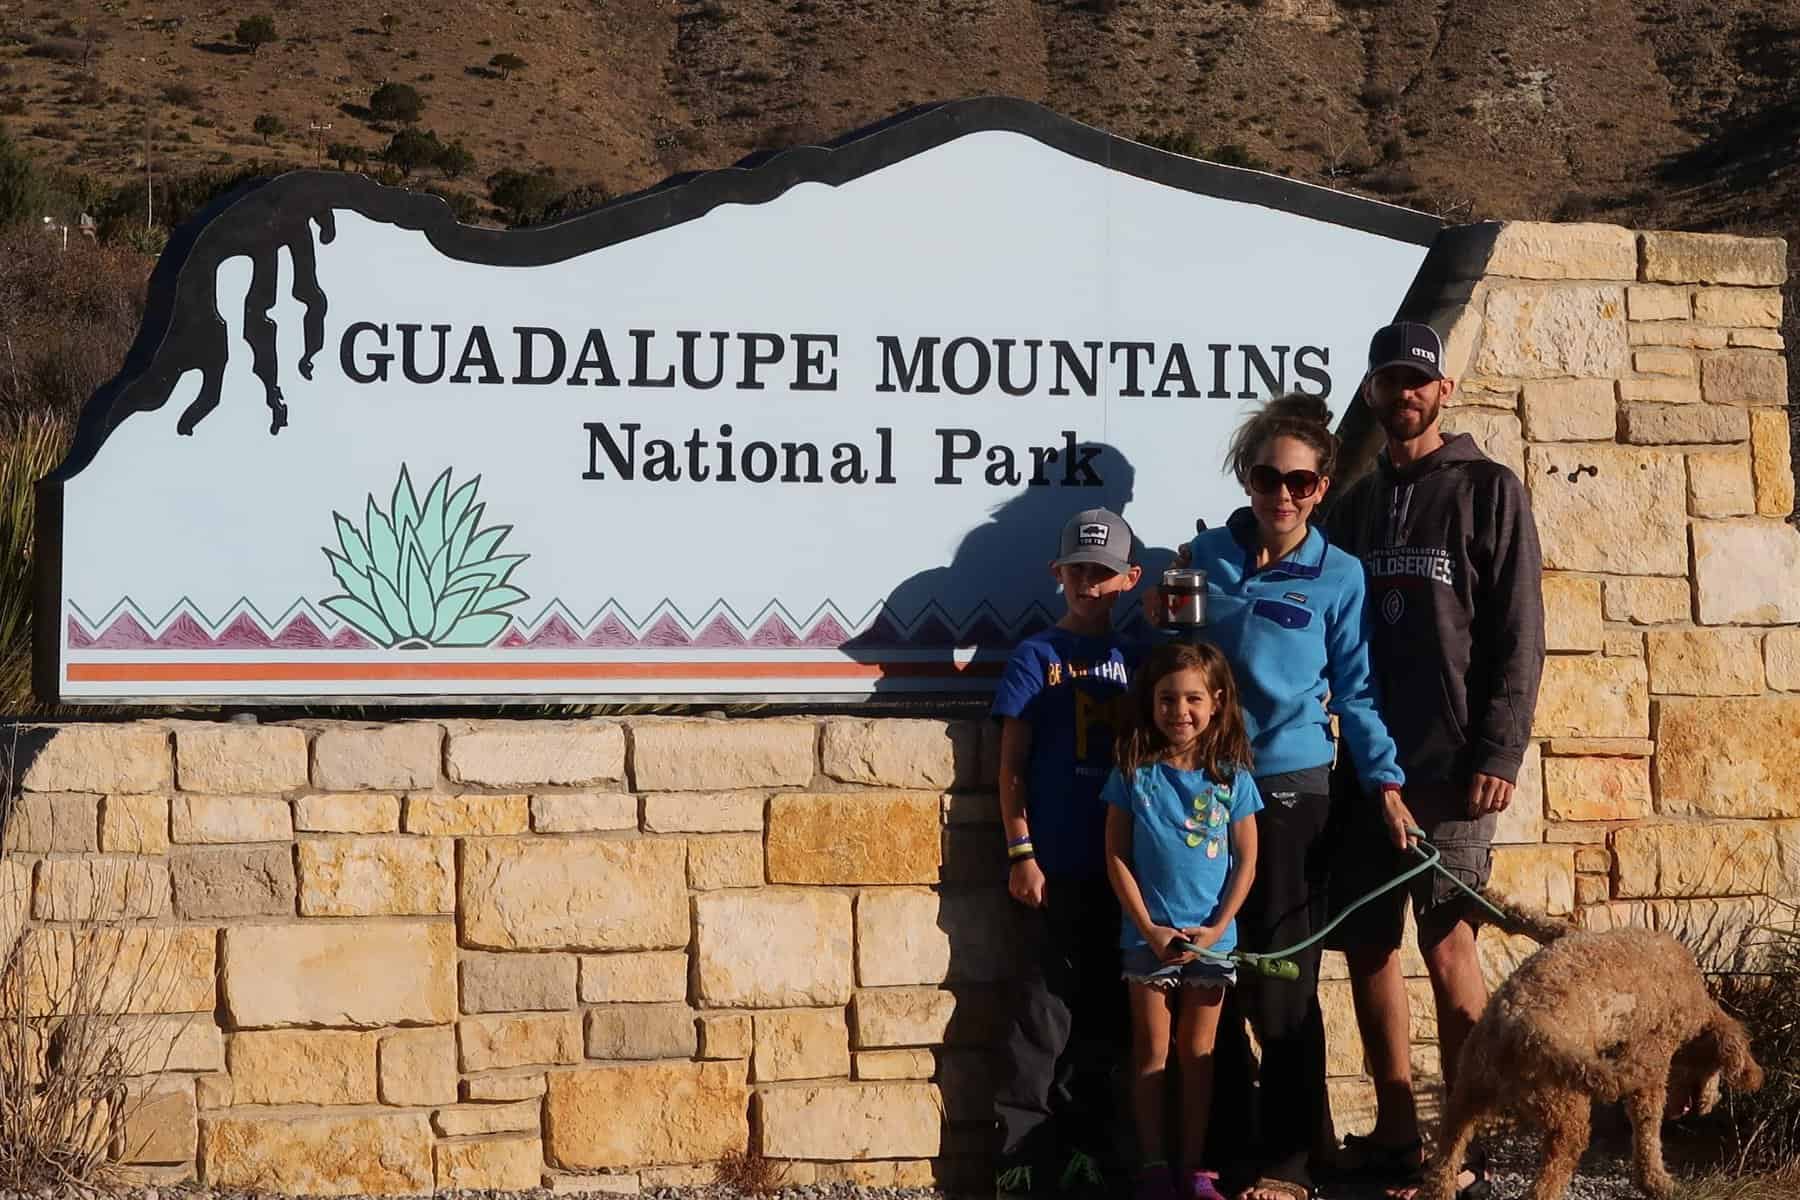 GUADALUPE MOUNTAINS NATIONAL PARK